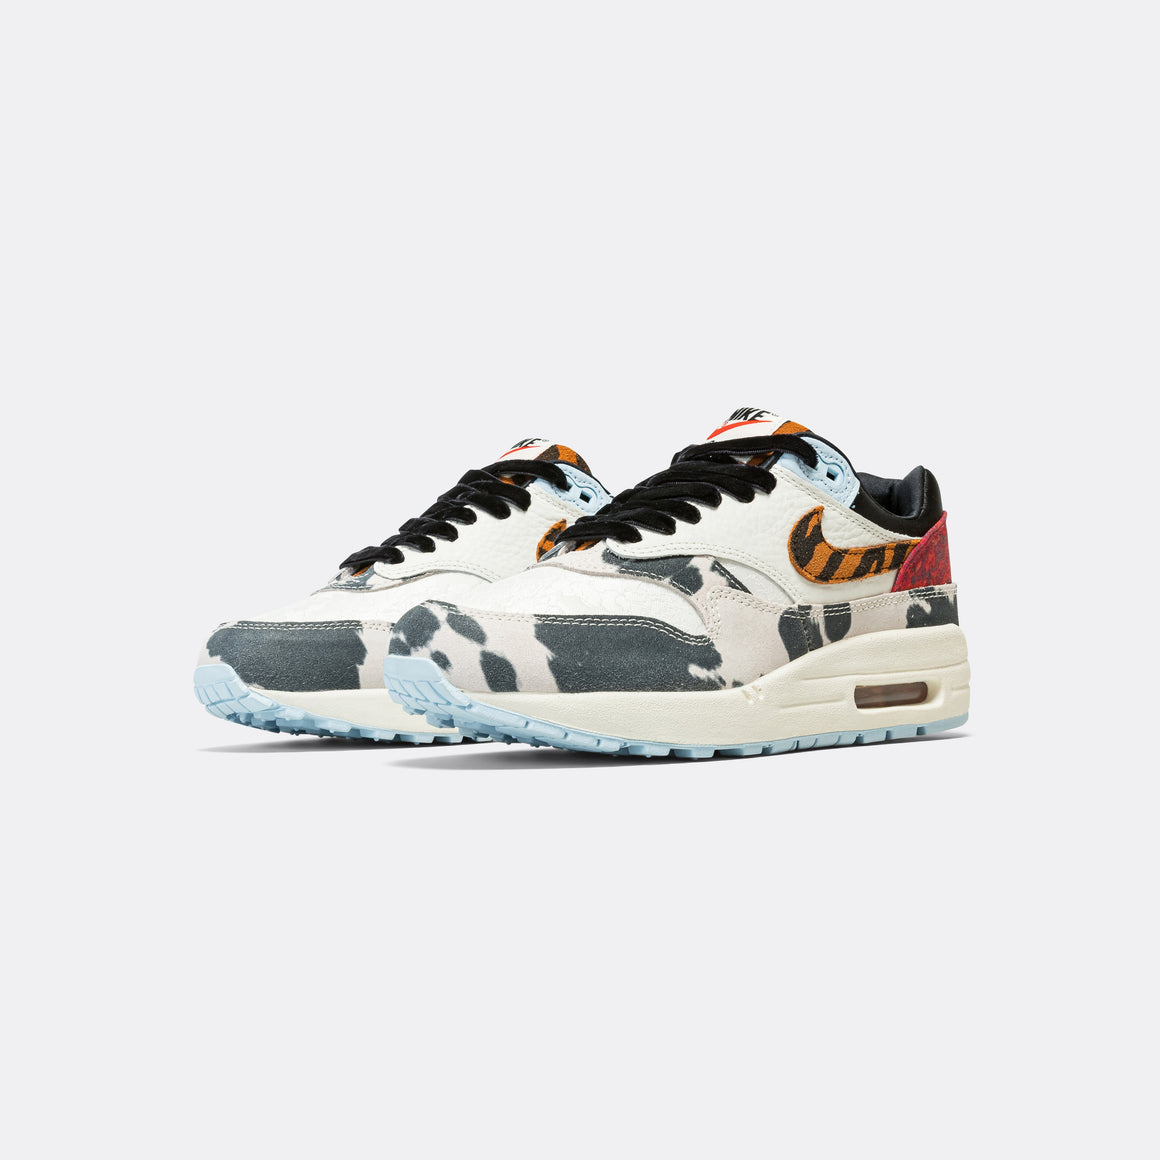 Nike - Womens Air Max 1 '87 - Sail/Black-Celestine Blue-Picante Red - UP THERE